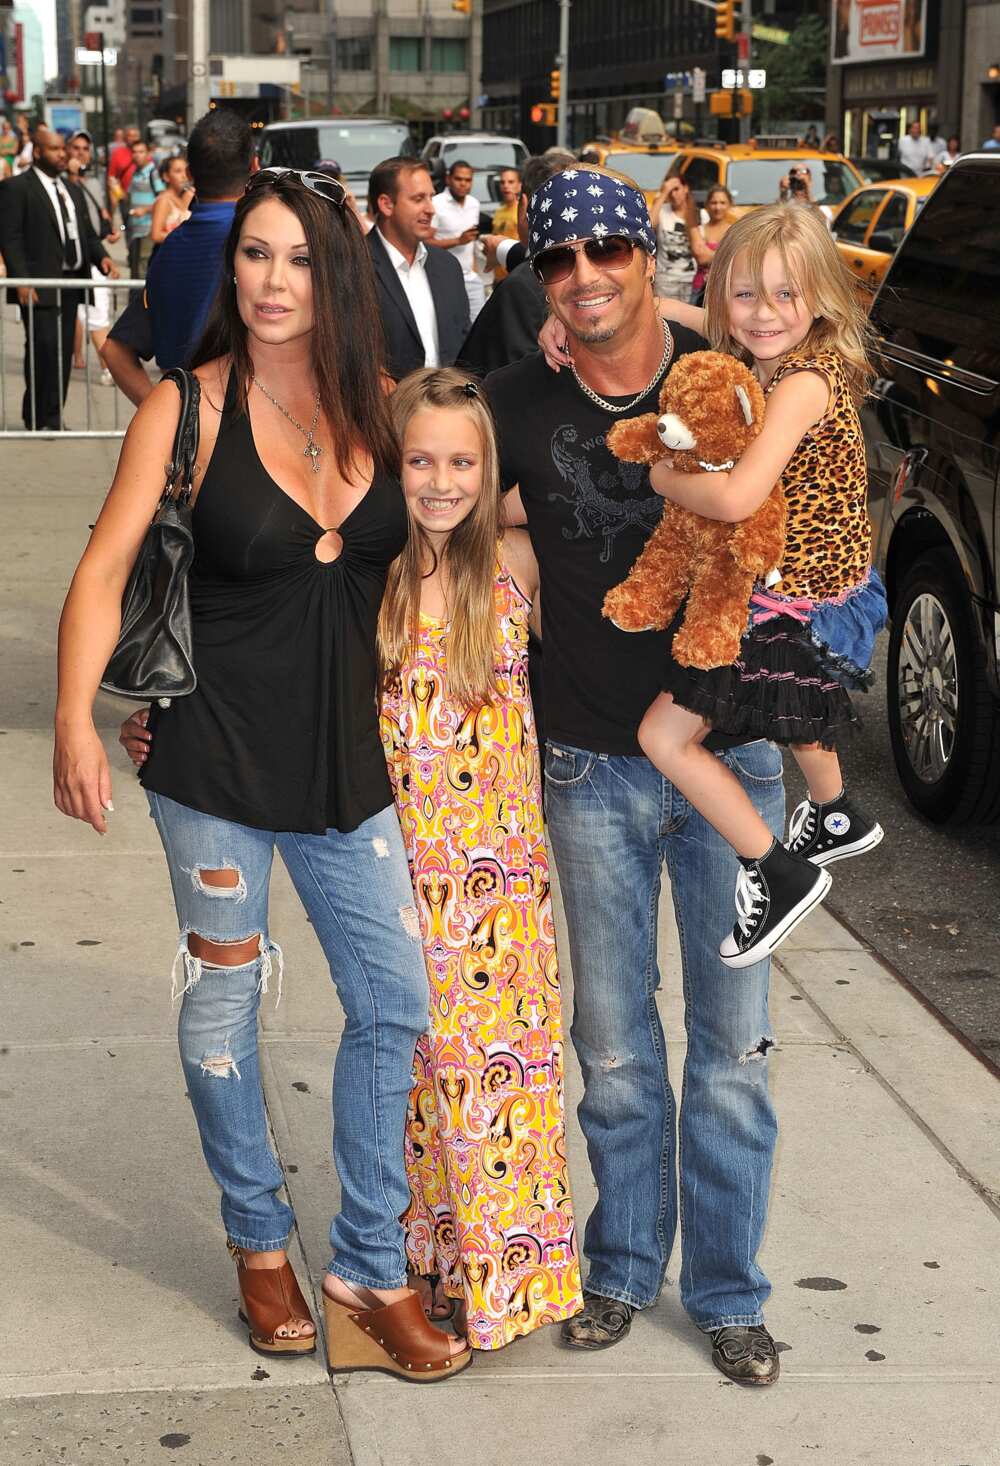 Bret Michaels with his partner Kristi Gibson and their children Raine and Jorja